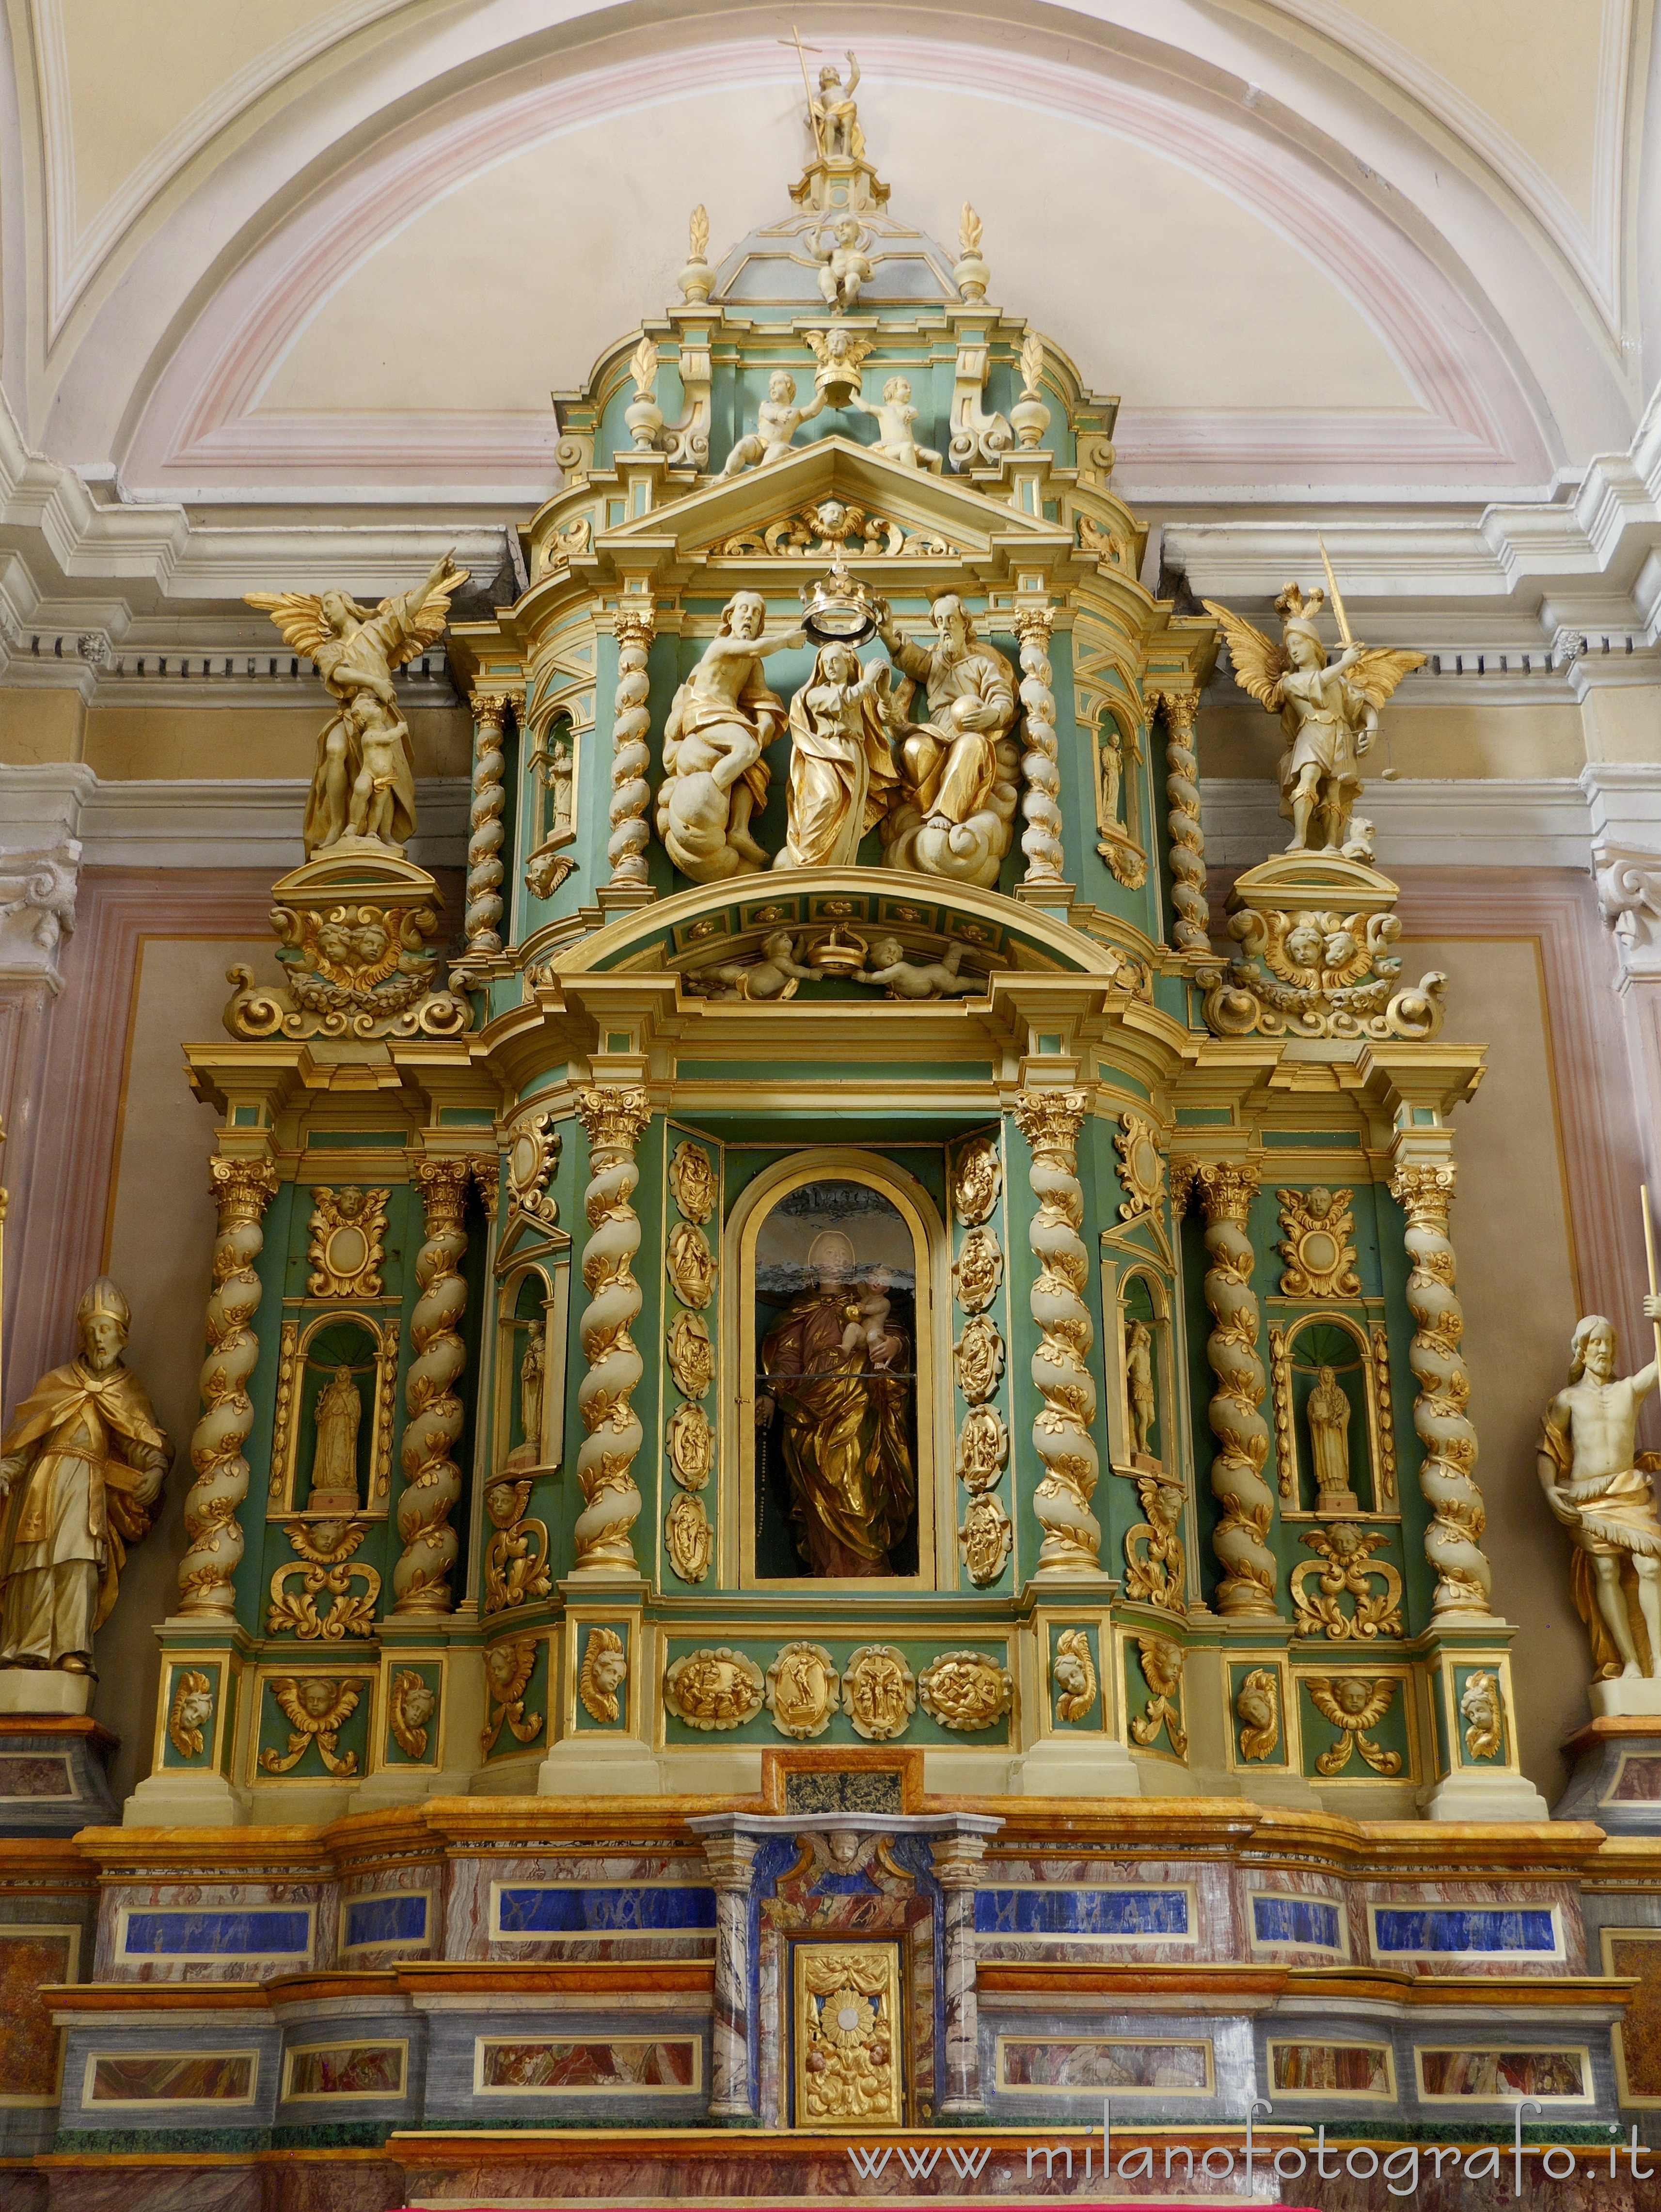 Ponderano (Biella (Italy)): Retable of the altar of the Virgin of the Rosary in the Church of St. Lawrence Martyr - Ponderano (Biella (Italy))